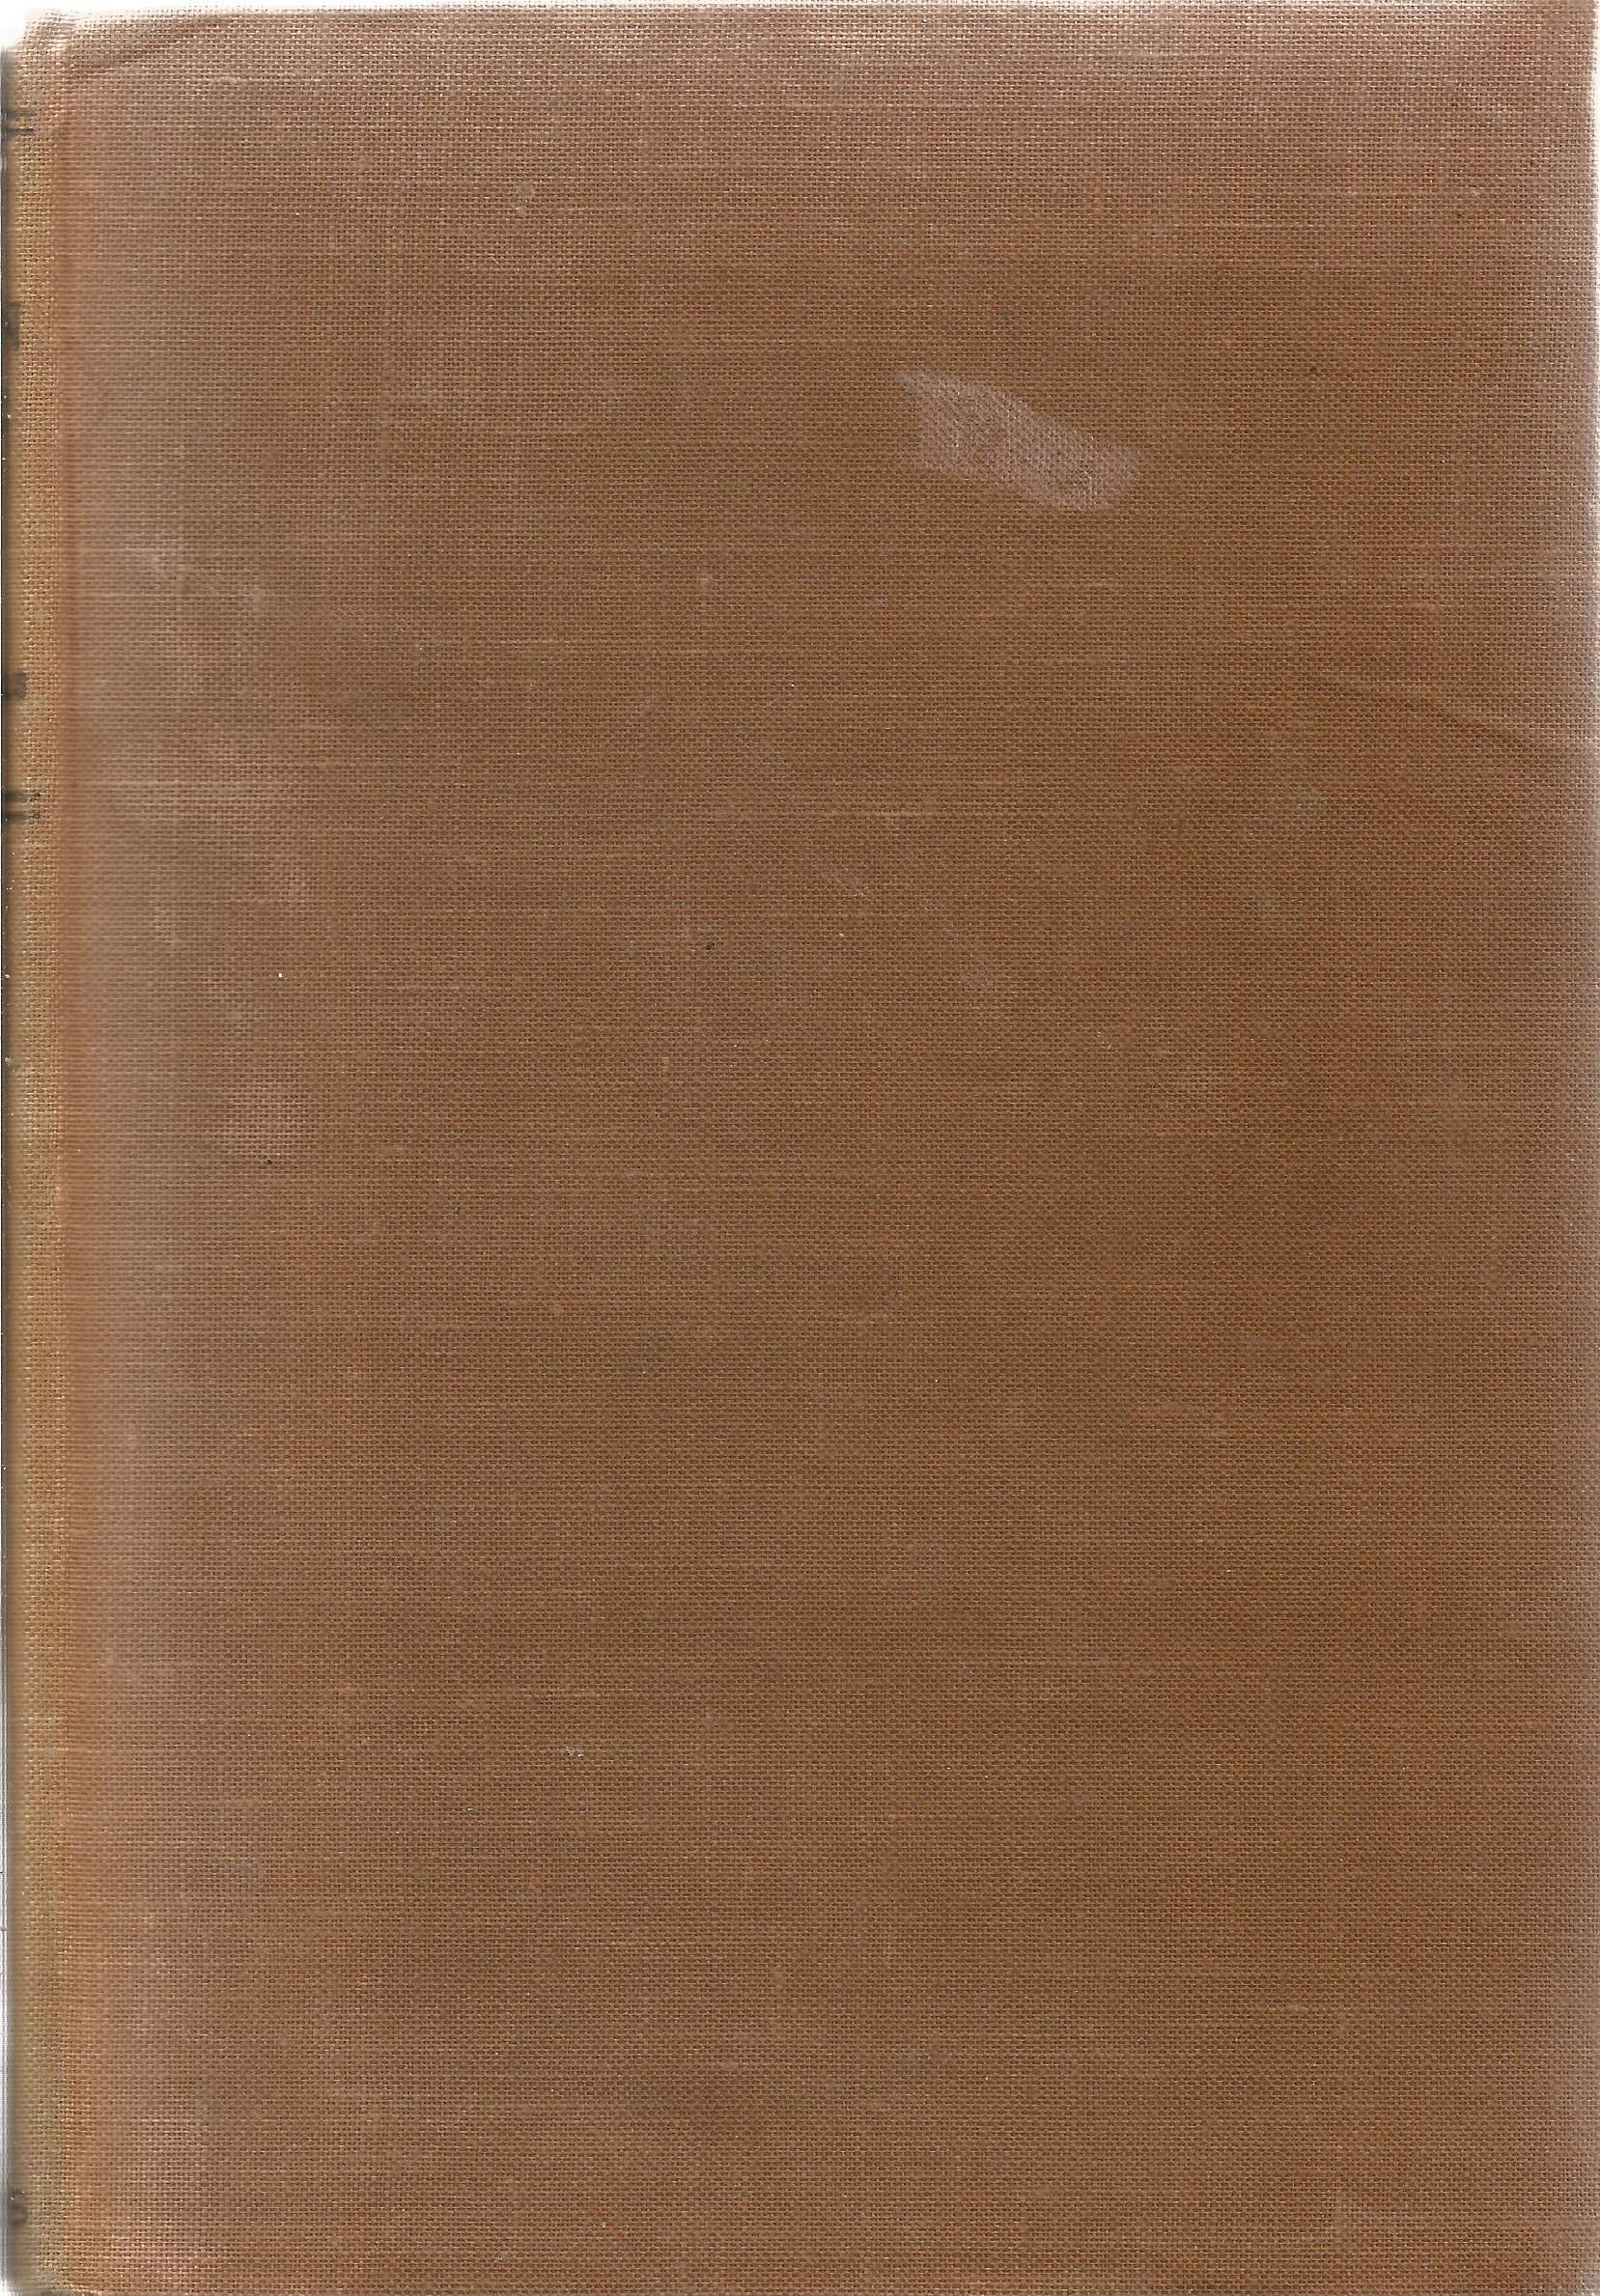 Eric Williams hardback book The Wooden Horse 1951 published by Collins Clear-Type Press in good